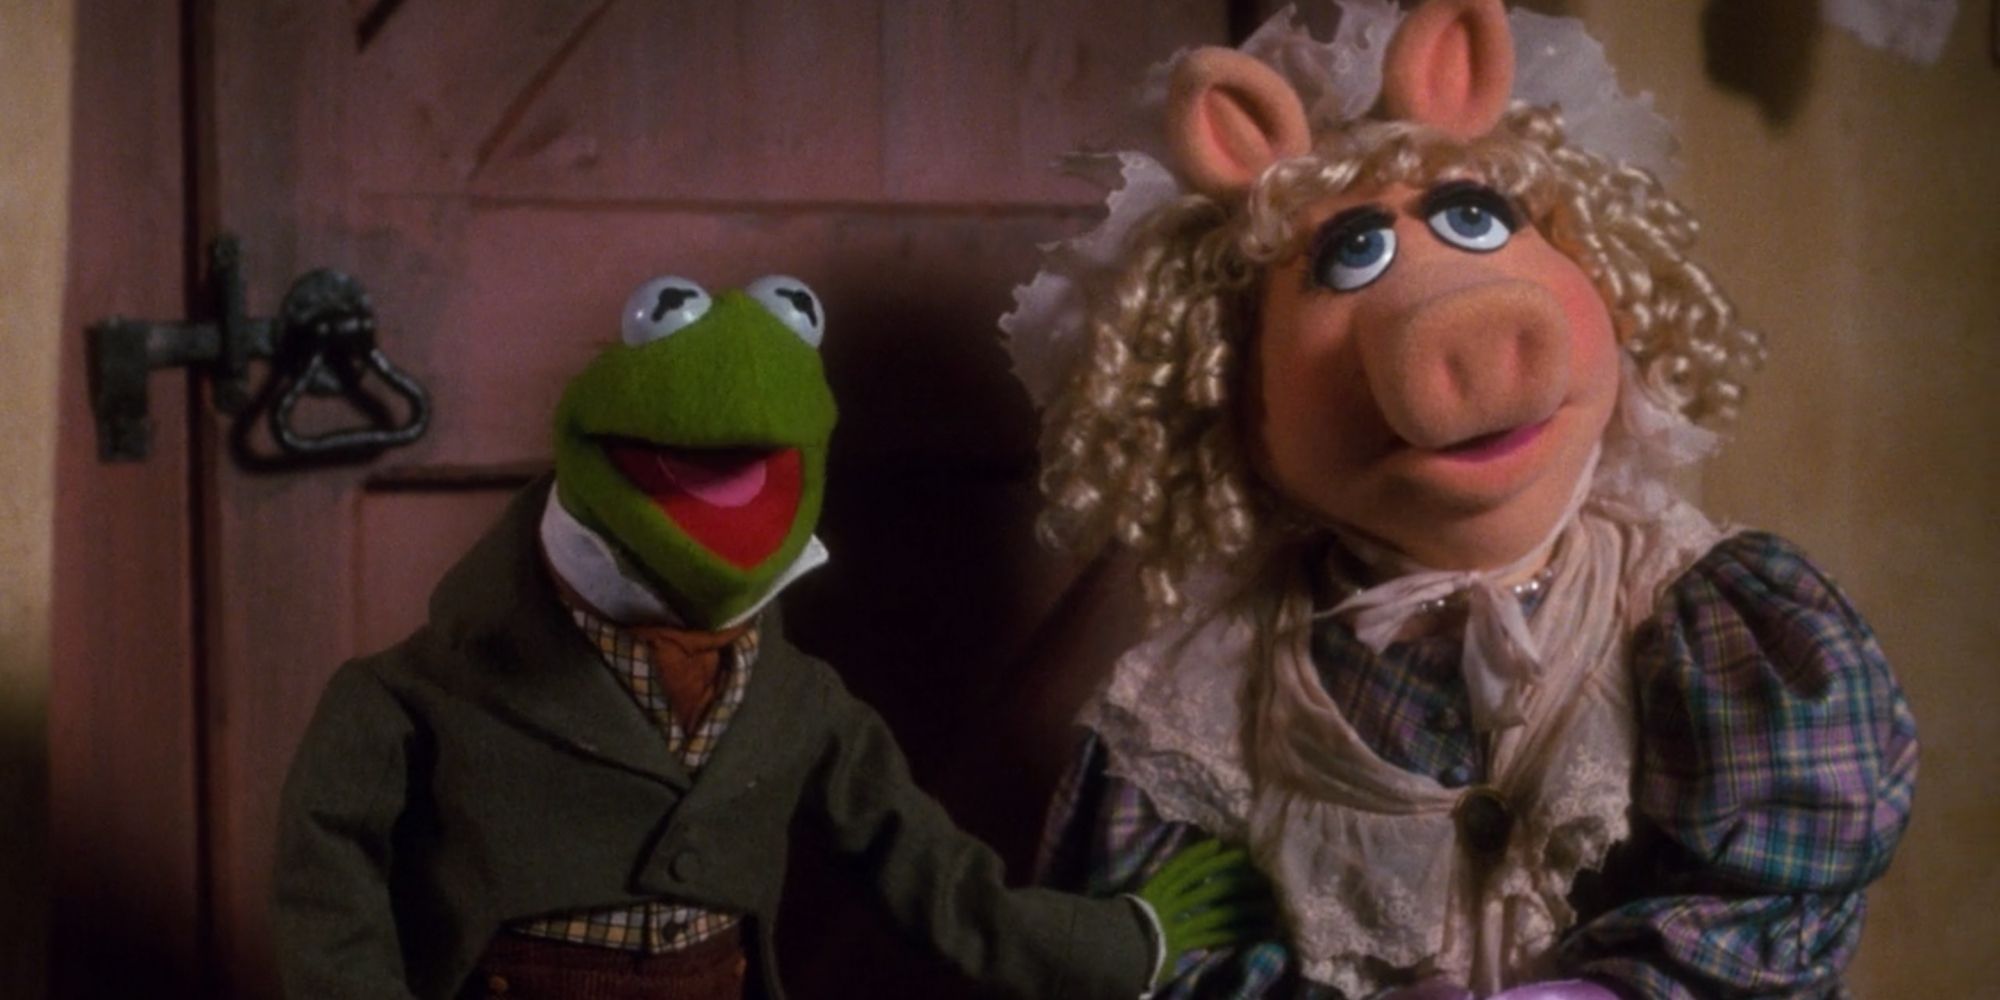 Kermit as Bob Cratchit and Miss Piggy as Emily Cratchit in The Muppet Christmas Carol.